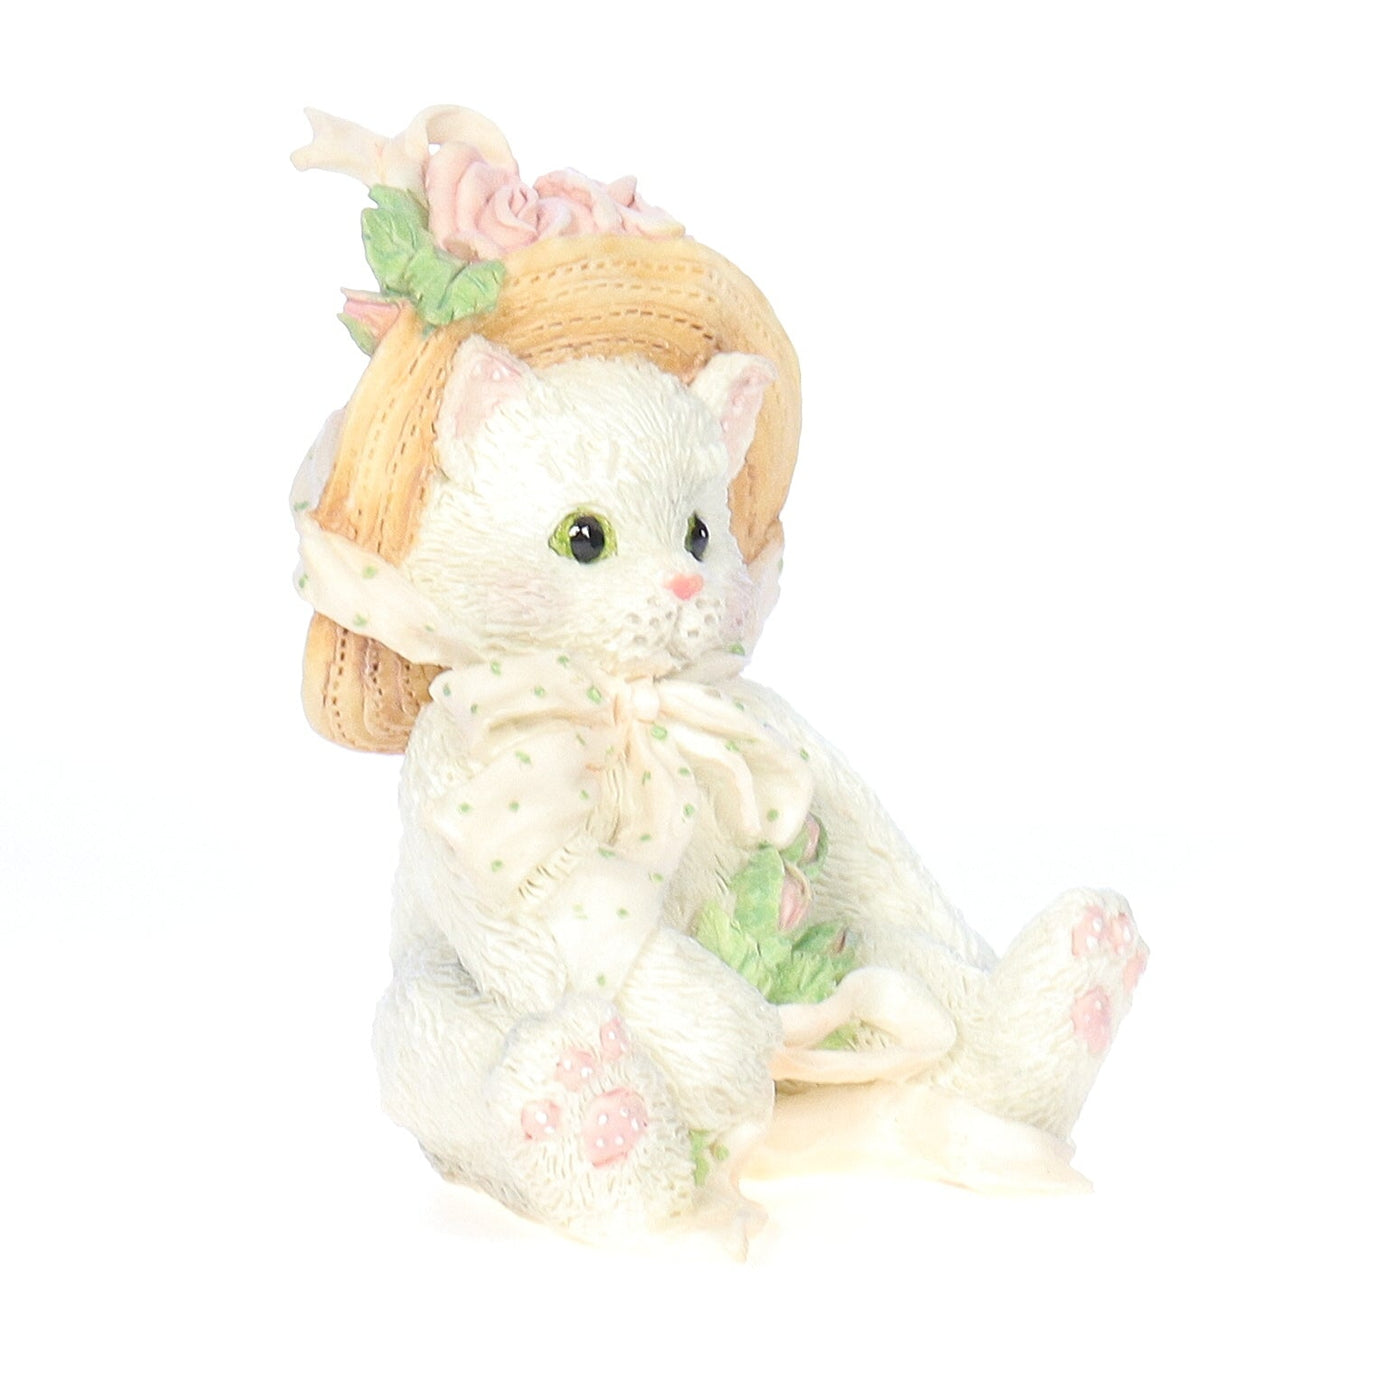 Calico_Kittens_our_Friendship_Blossomed_From_The_Heart_Valentines_Day_Figurine_1992